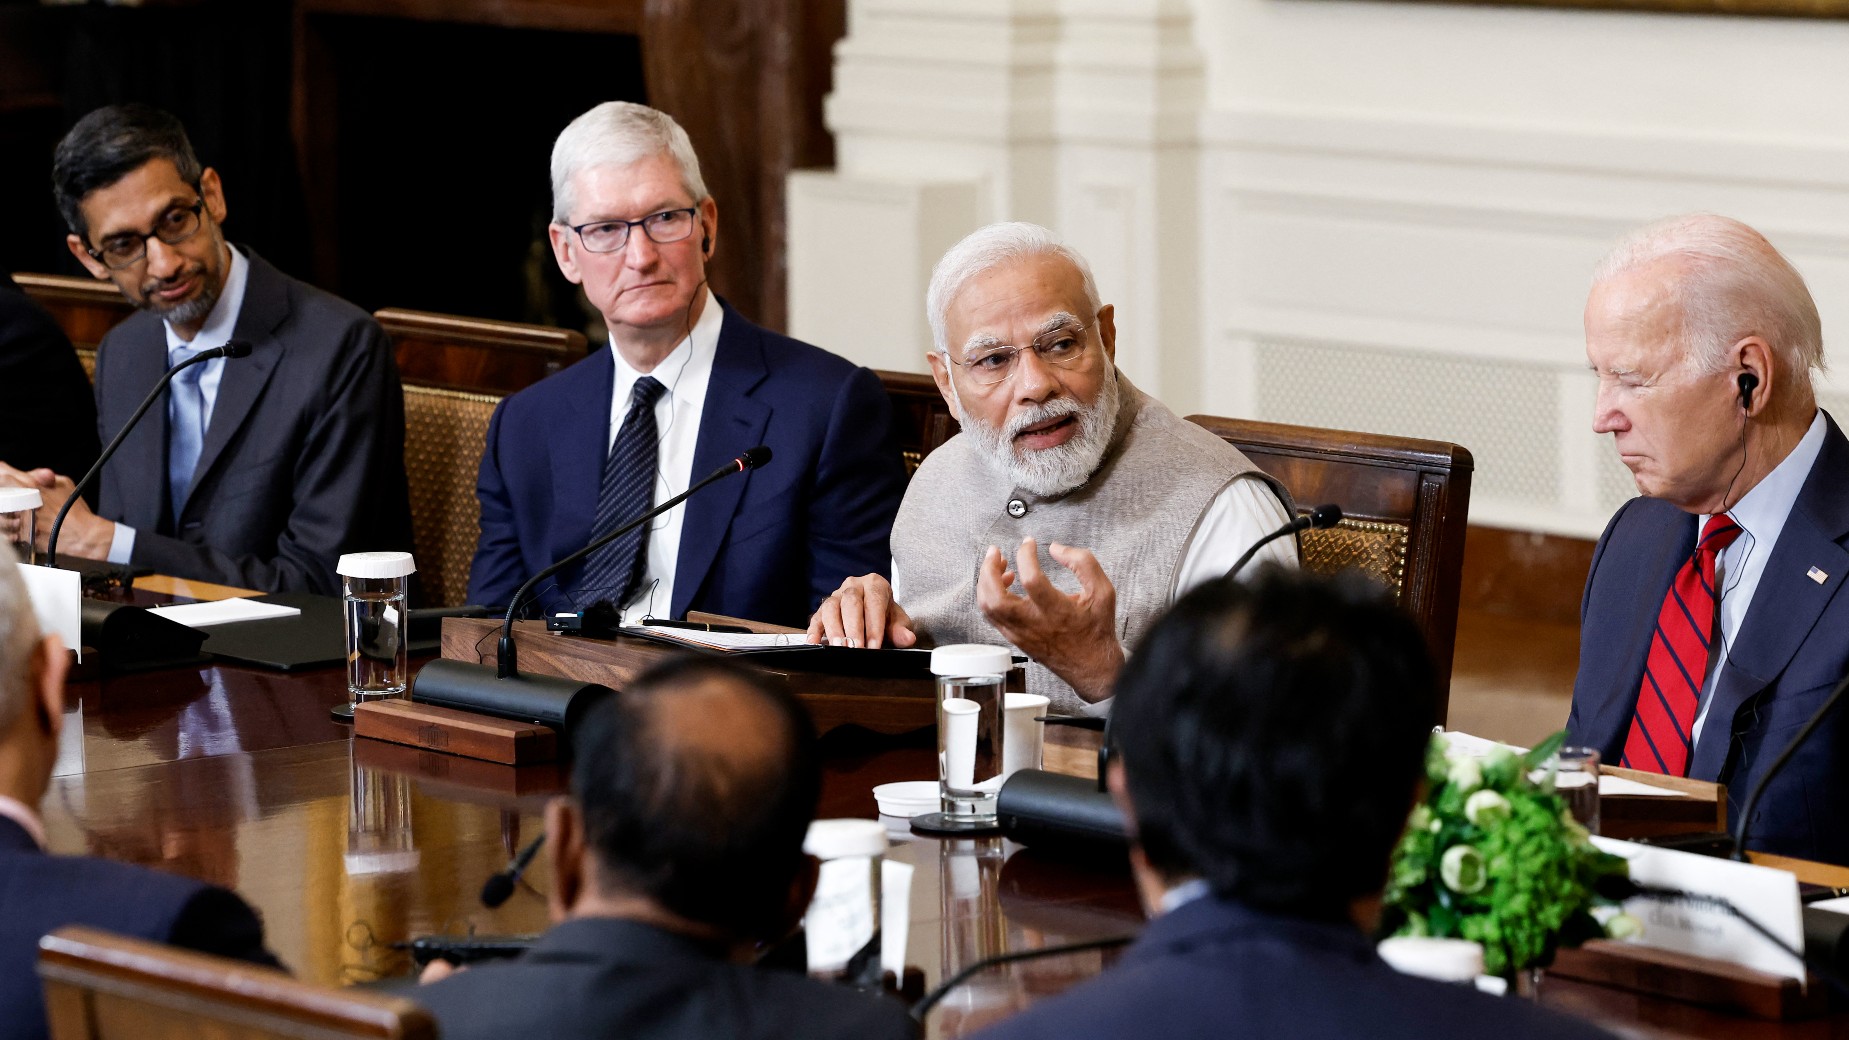 Biden and Modi held the meeting to meet with a range of leaders from the tech and business worlds, including Google CEO Sundar Pichai (L) and Apple CEO Tim Cook (2nd from left) [AFP]